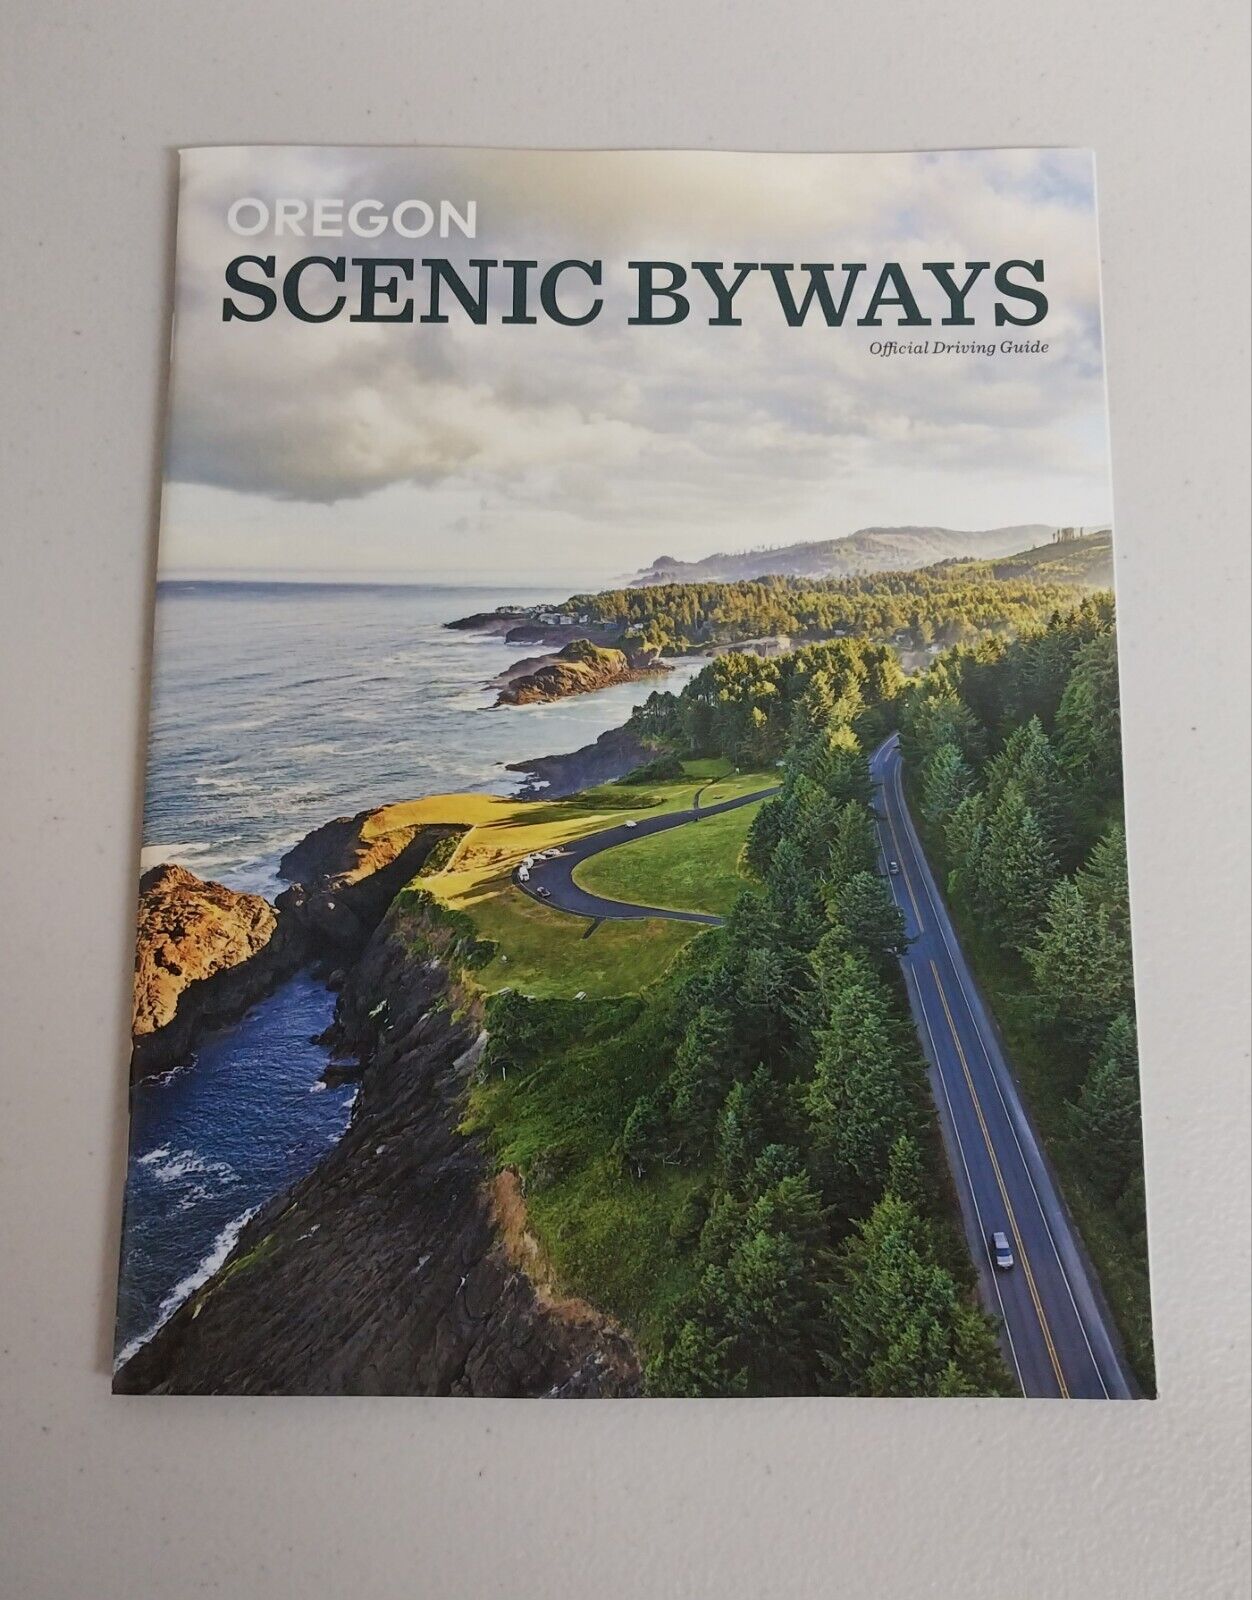 Oregon Scenic Byways Official Driving Guide 80 Full-Color Pages BEAVER State